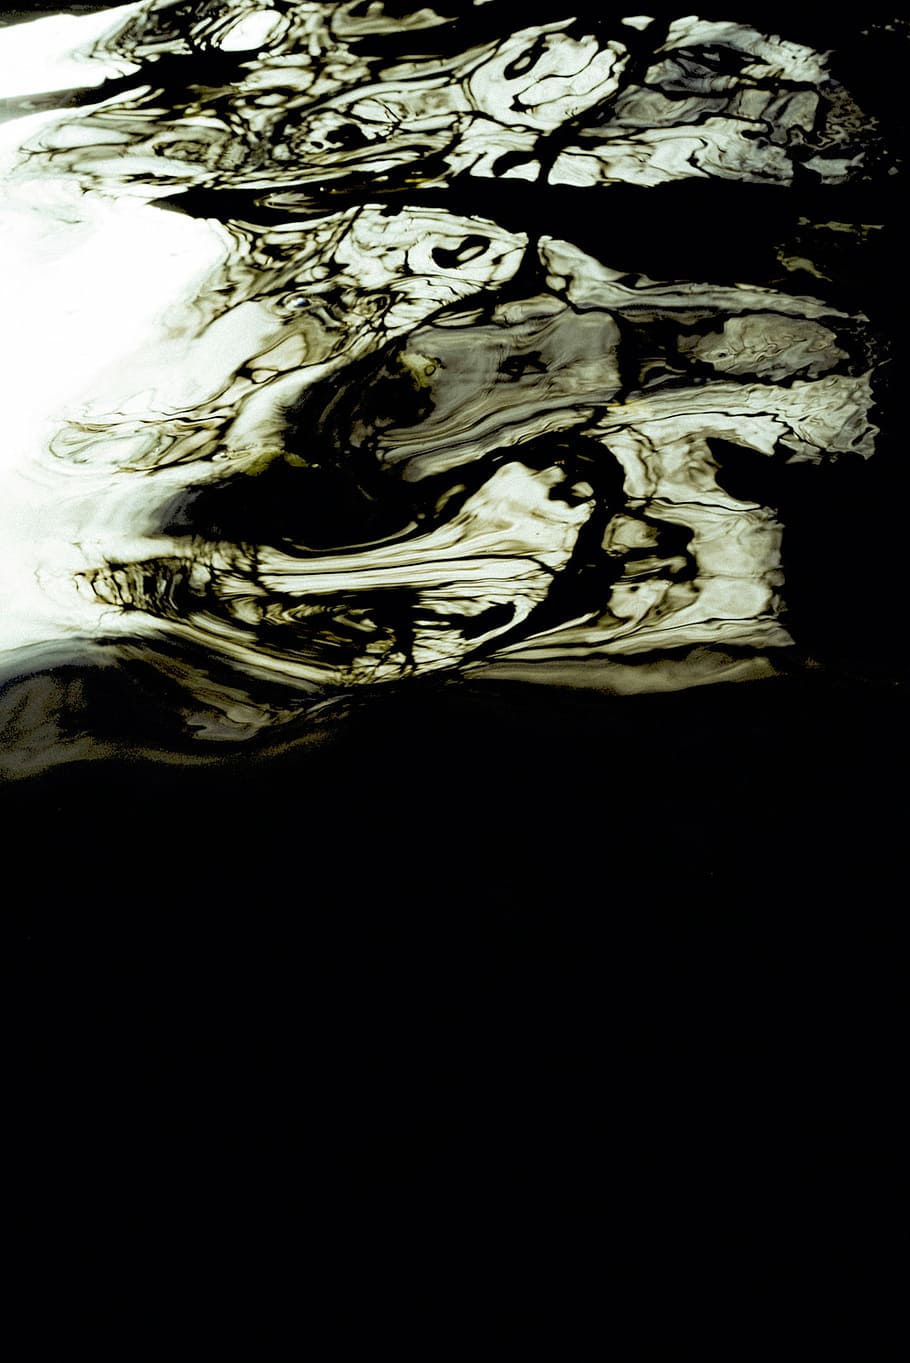 white, black, abstract, illustration, liquid, water, oil, reflection, black and white, grayscale